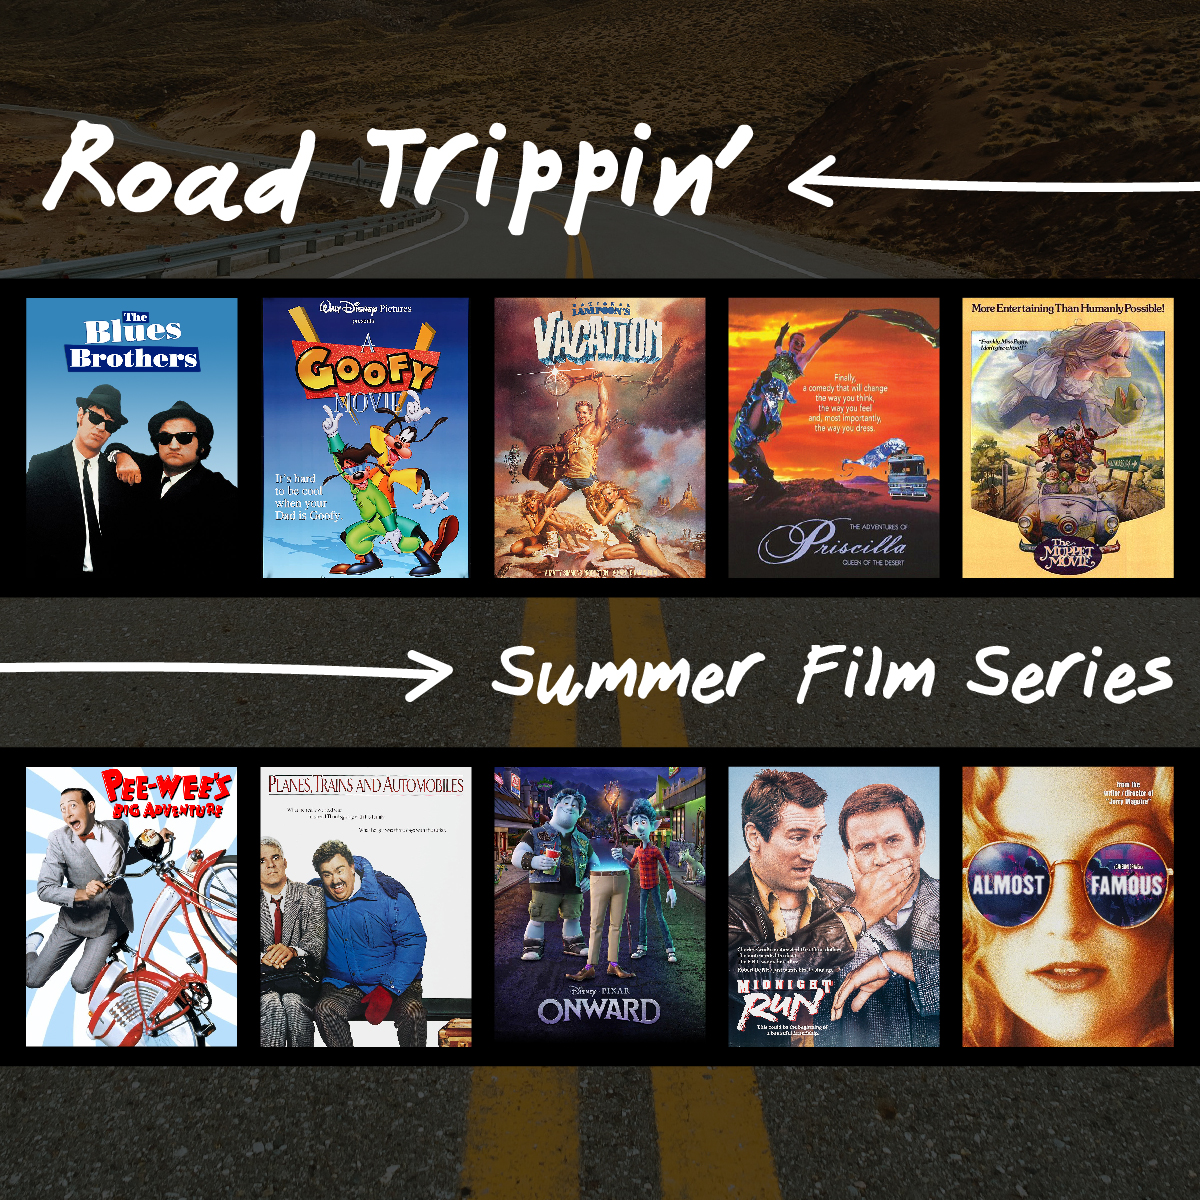 Road Trippin' Graphic with movie posters